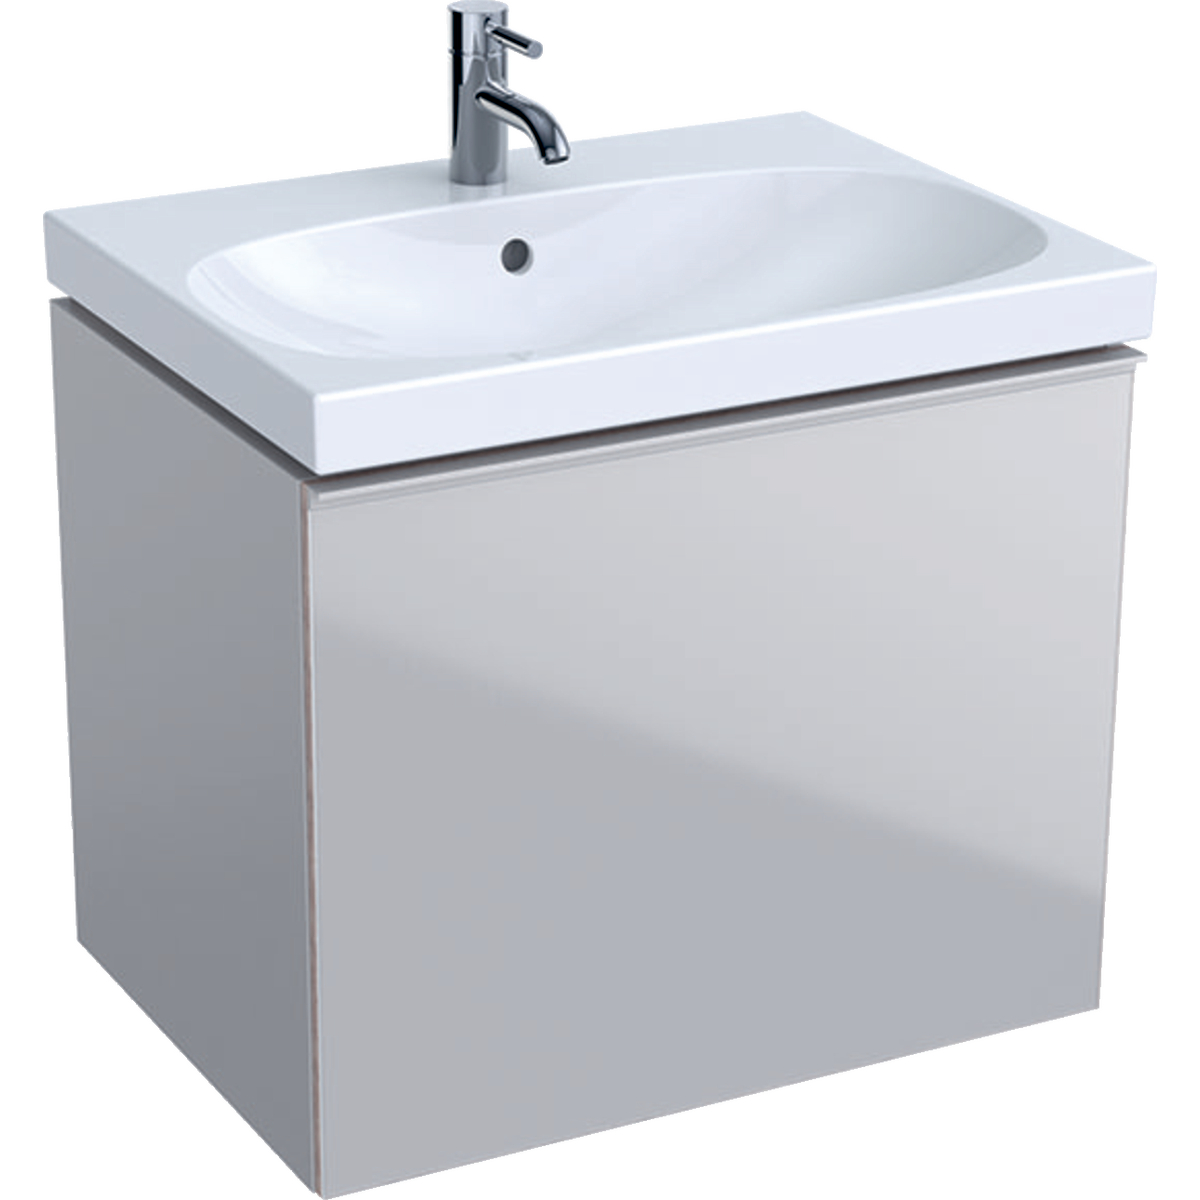 Geberit 500610JL2 Acanto 640mm Vanity Unit with Drawer - Sand (Basin & Brassware NOT Included)